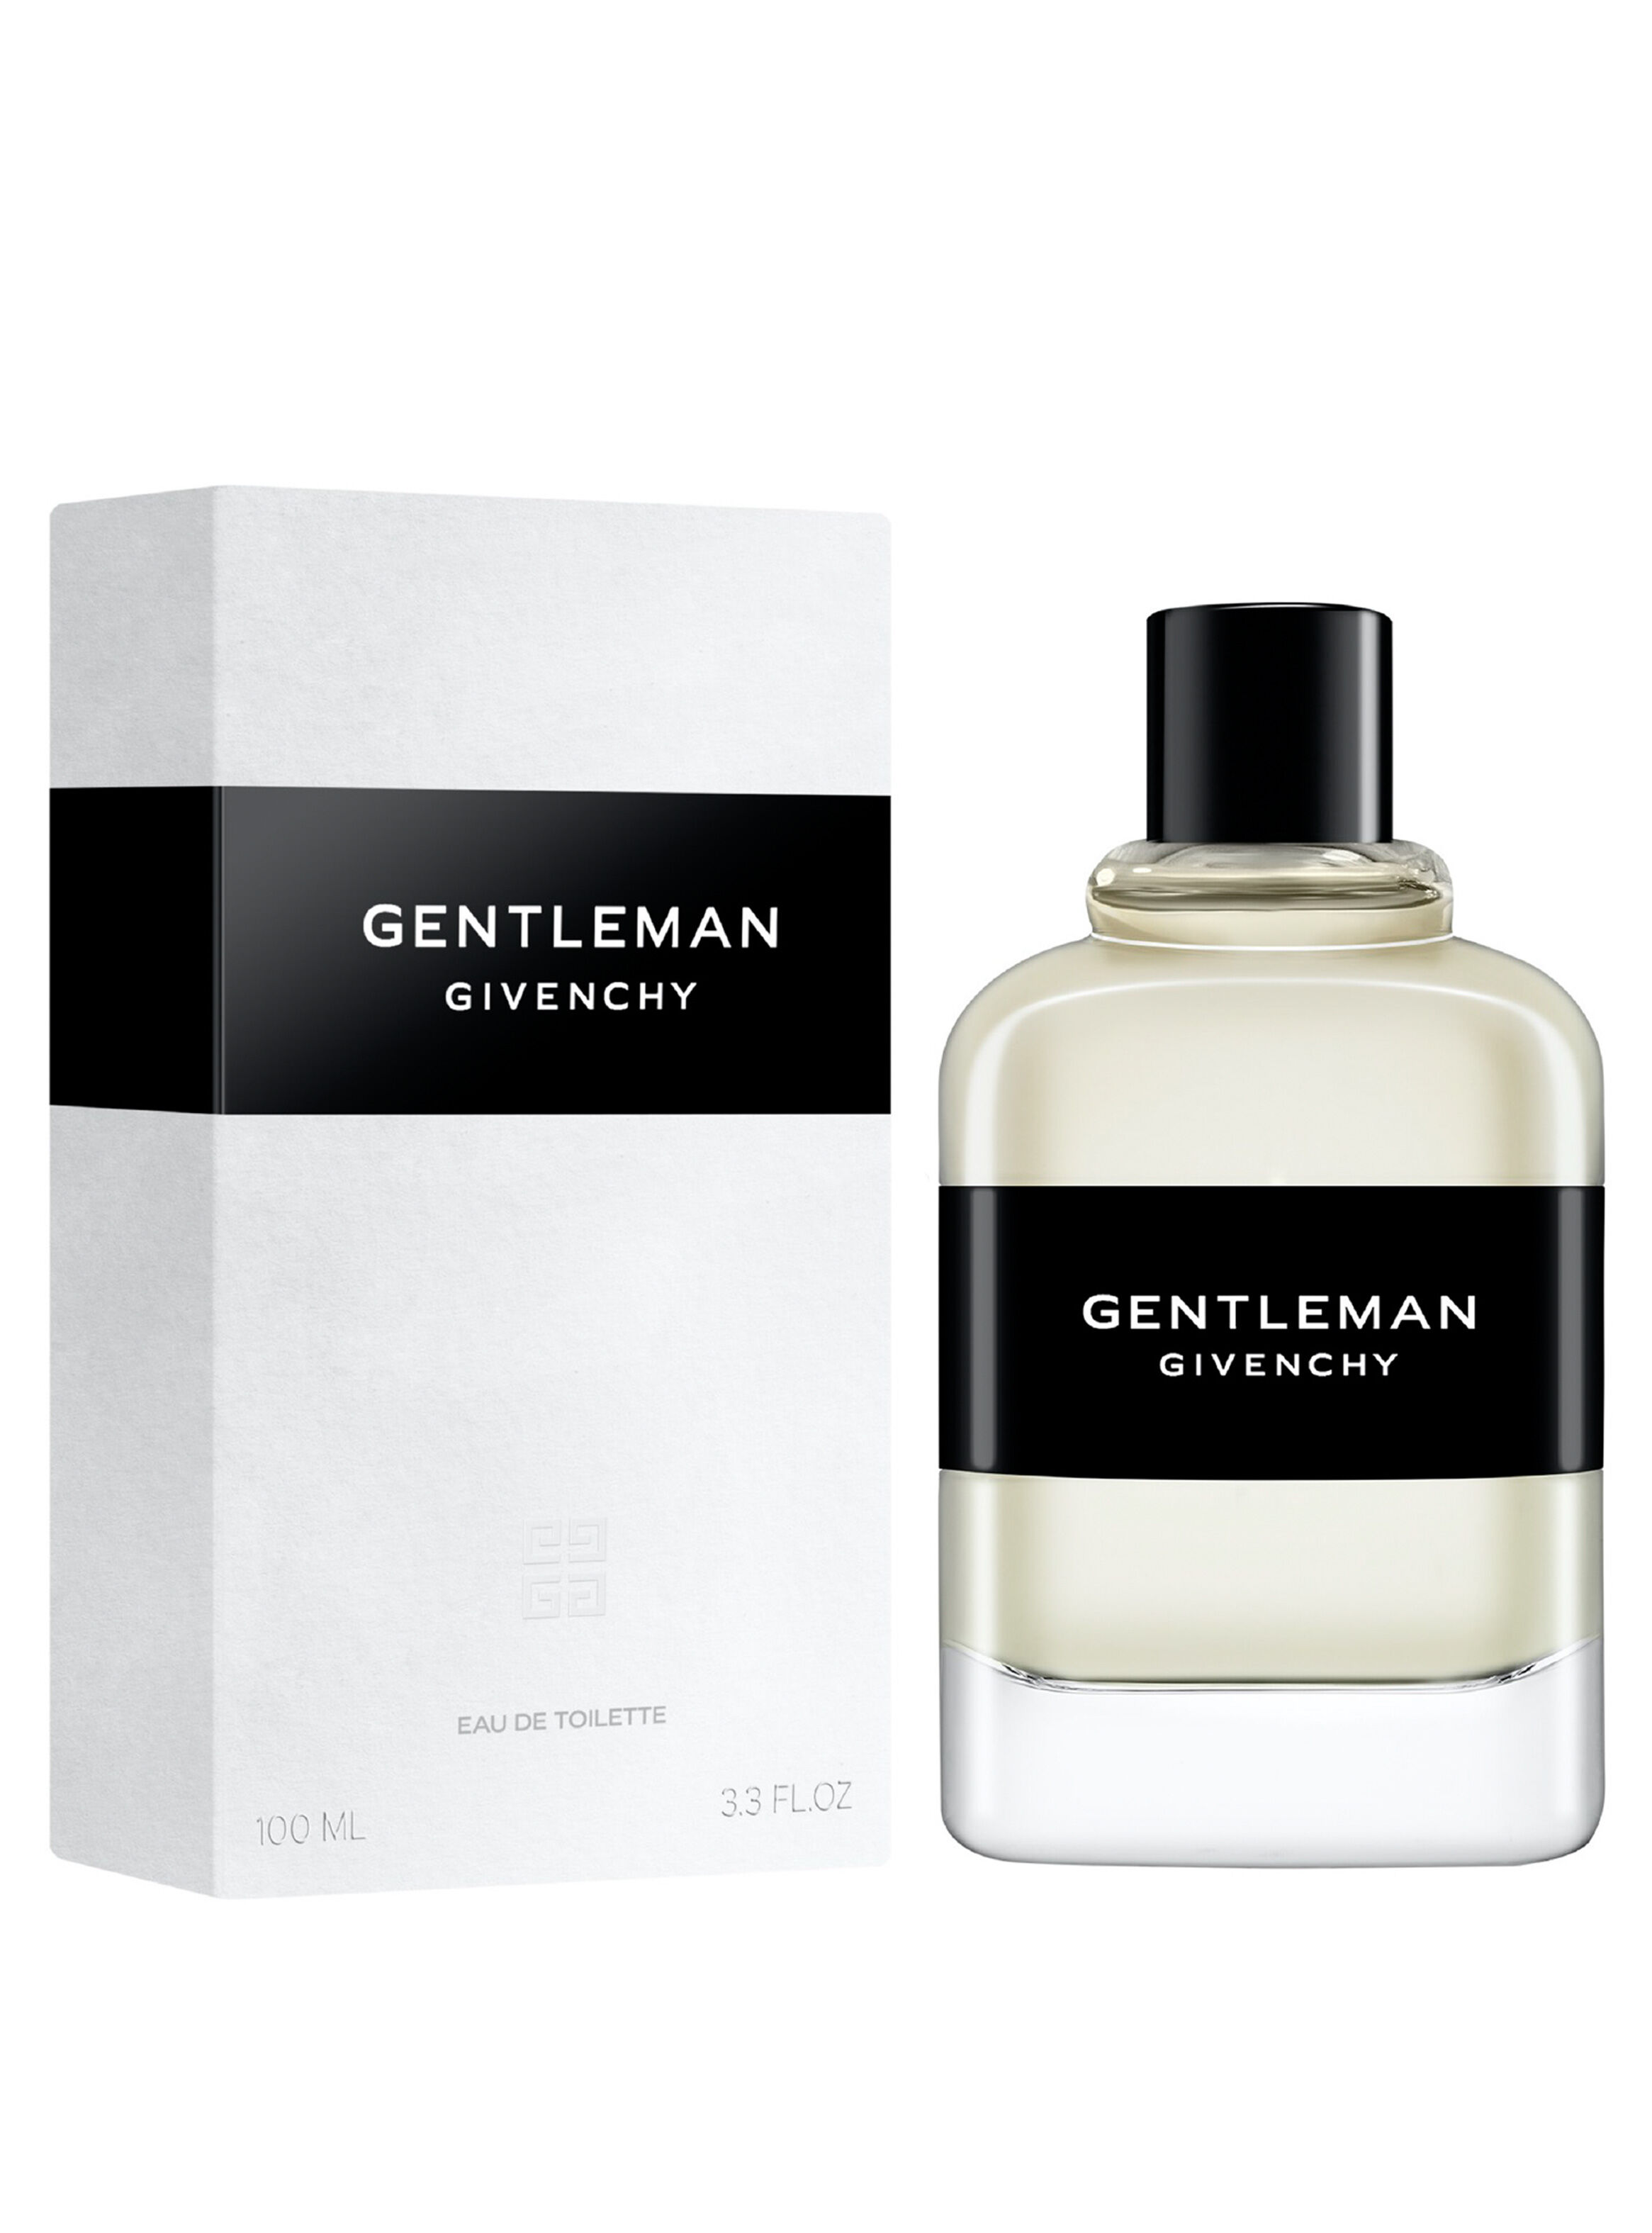 givenchy hombre gentleman